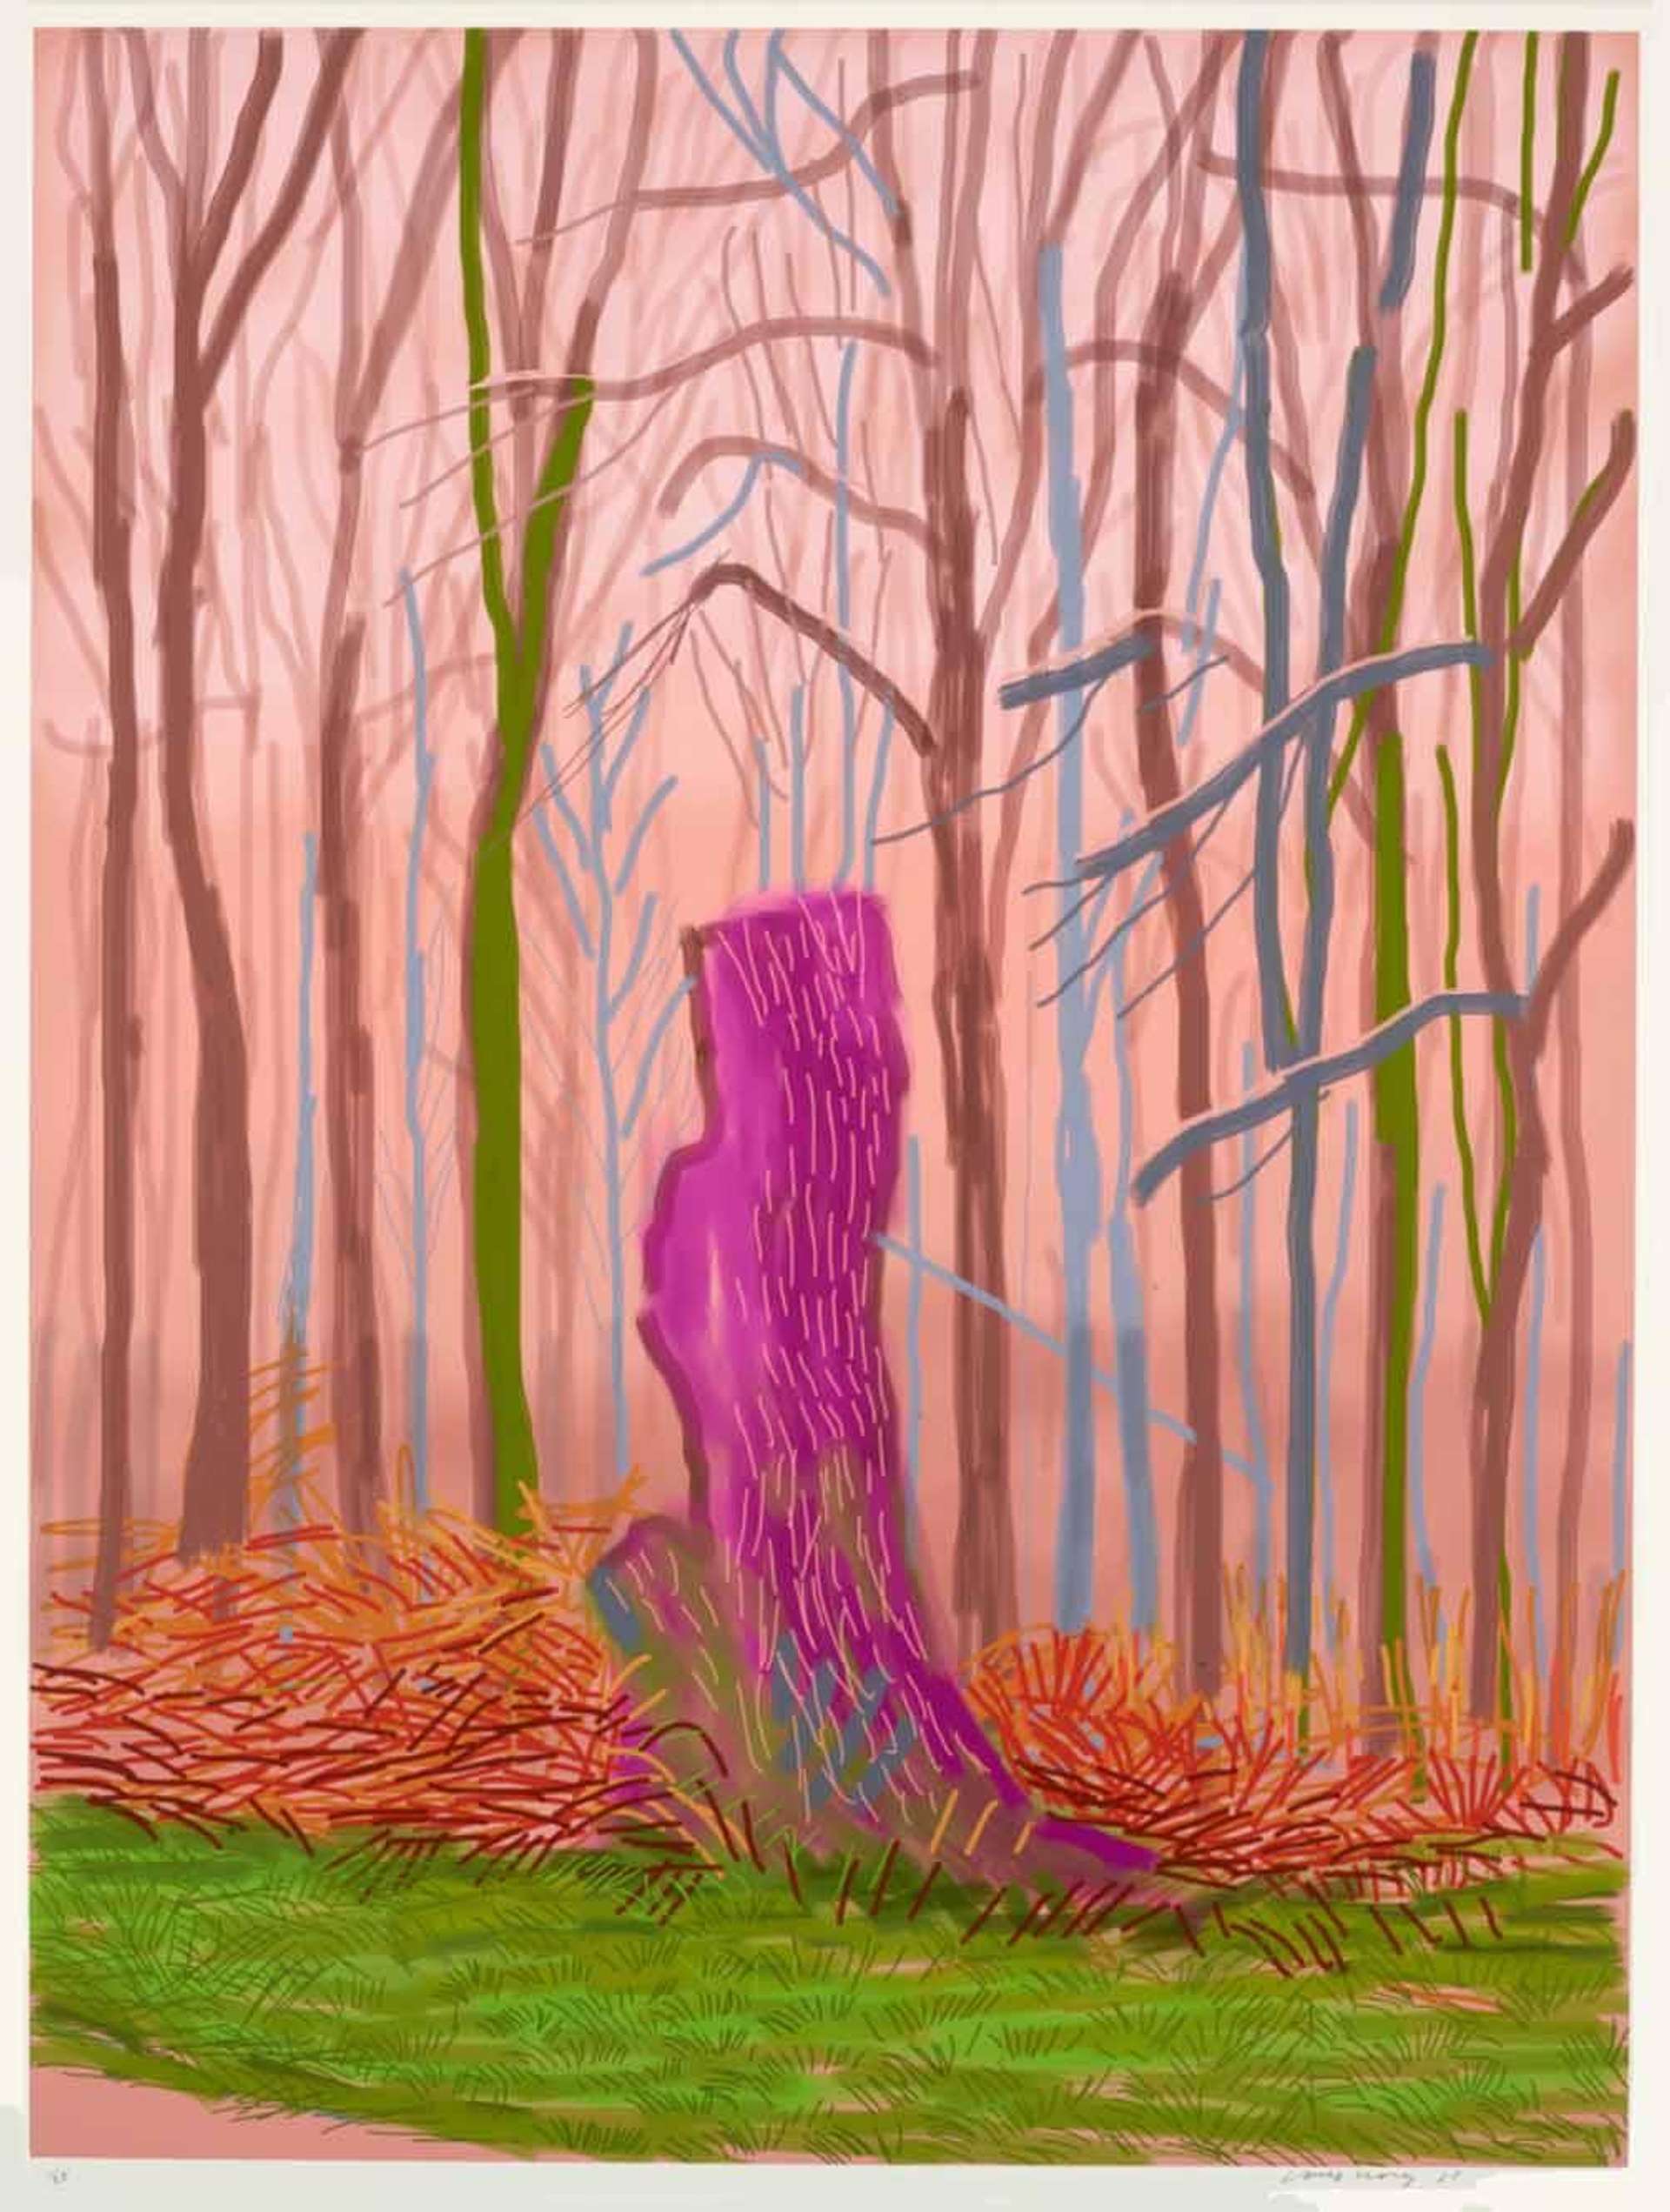 The Arrival Of Spring In Woldgate East Yorkshire 15th March 2011 - Signed Print by David Hockney 2011 - MyArtBroker